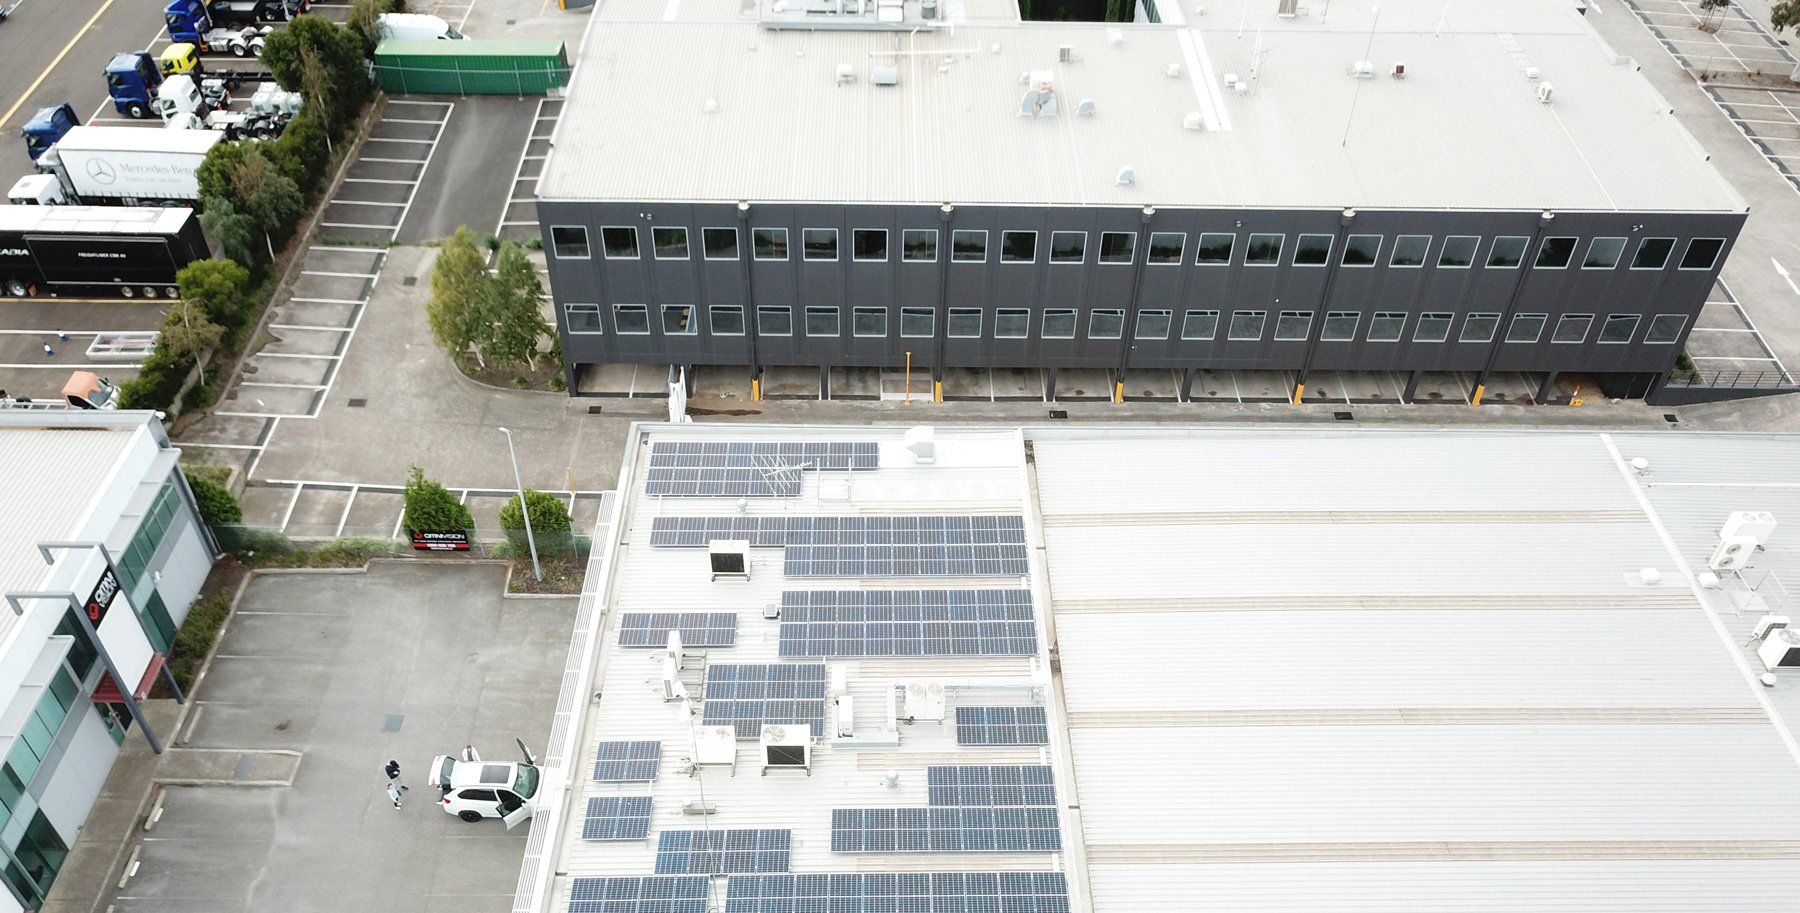 Solving high energy costs and reduce carbon emissions for Emerging IT through solar power.